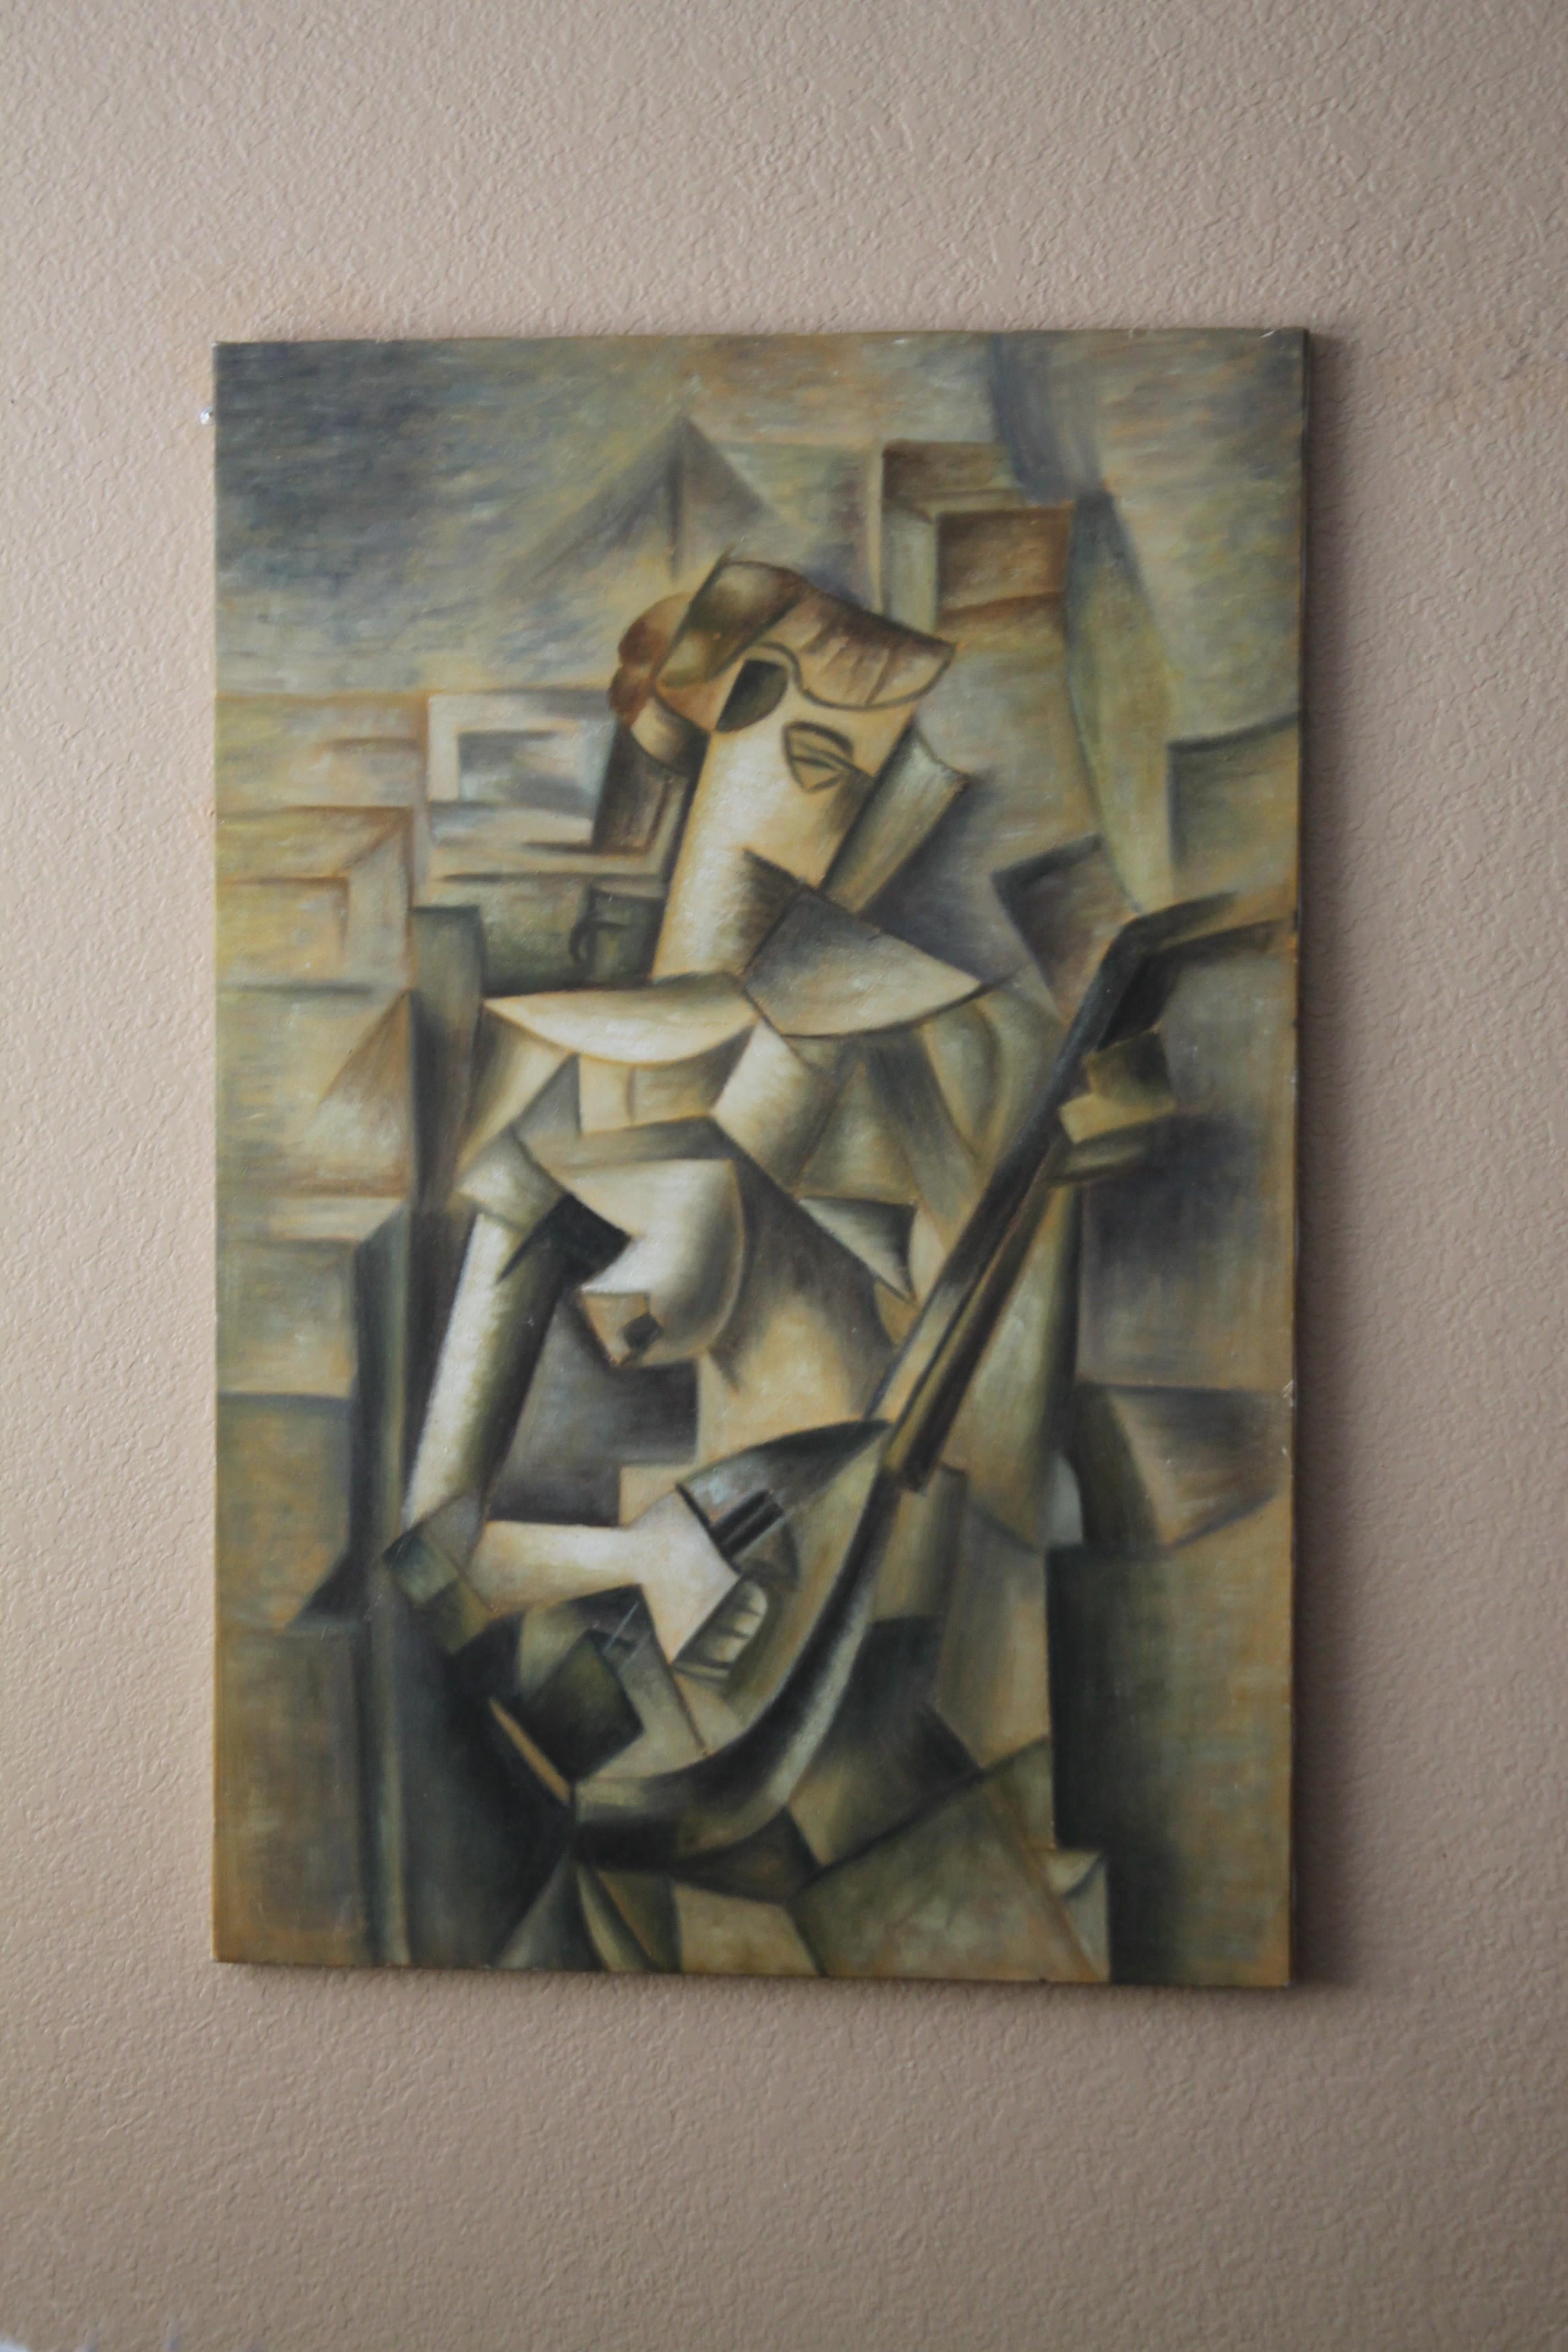 Stunning!

Re-creation of Pablo Picasso's
Iconic Cubist Painting
